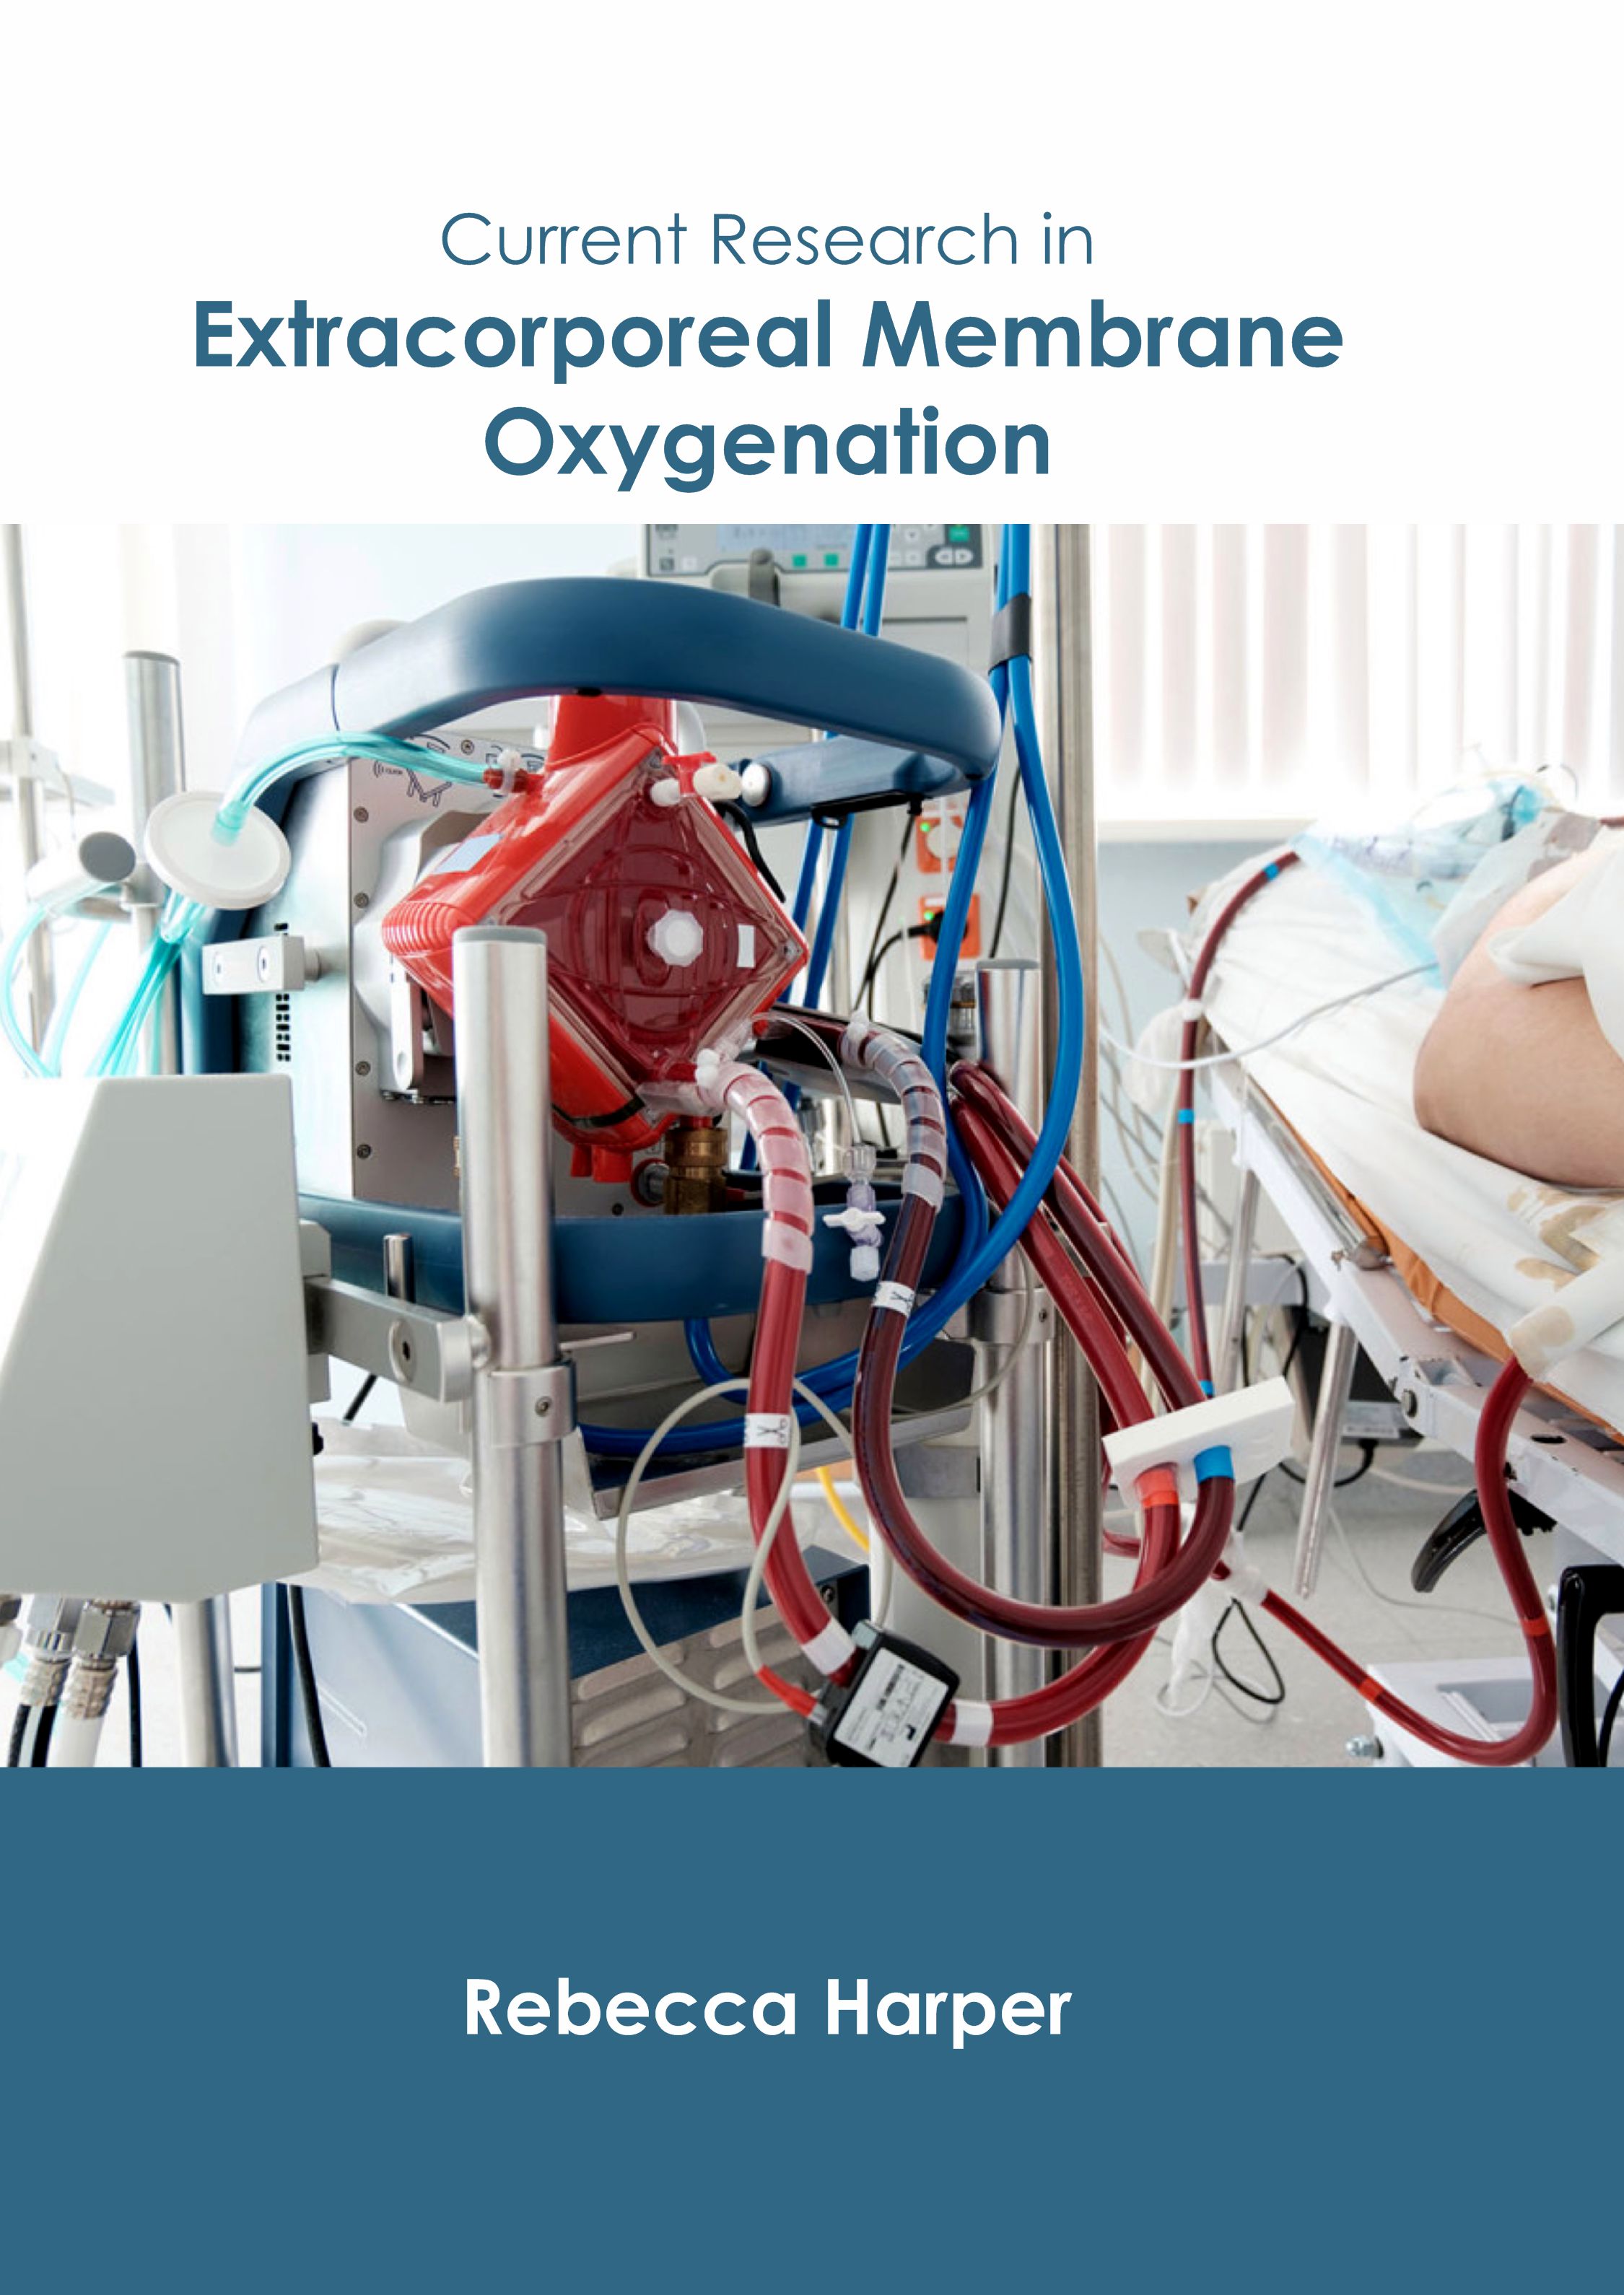 CURRENT RESEARCH IN EXTRACORPOREAL MEMBRANE OXYGENATION